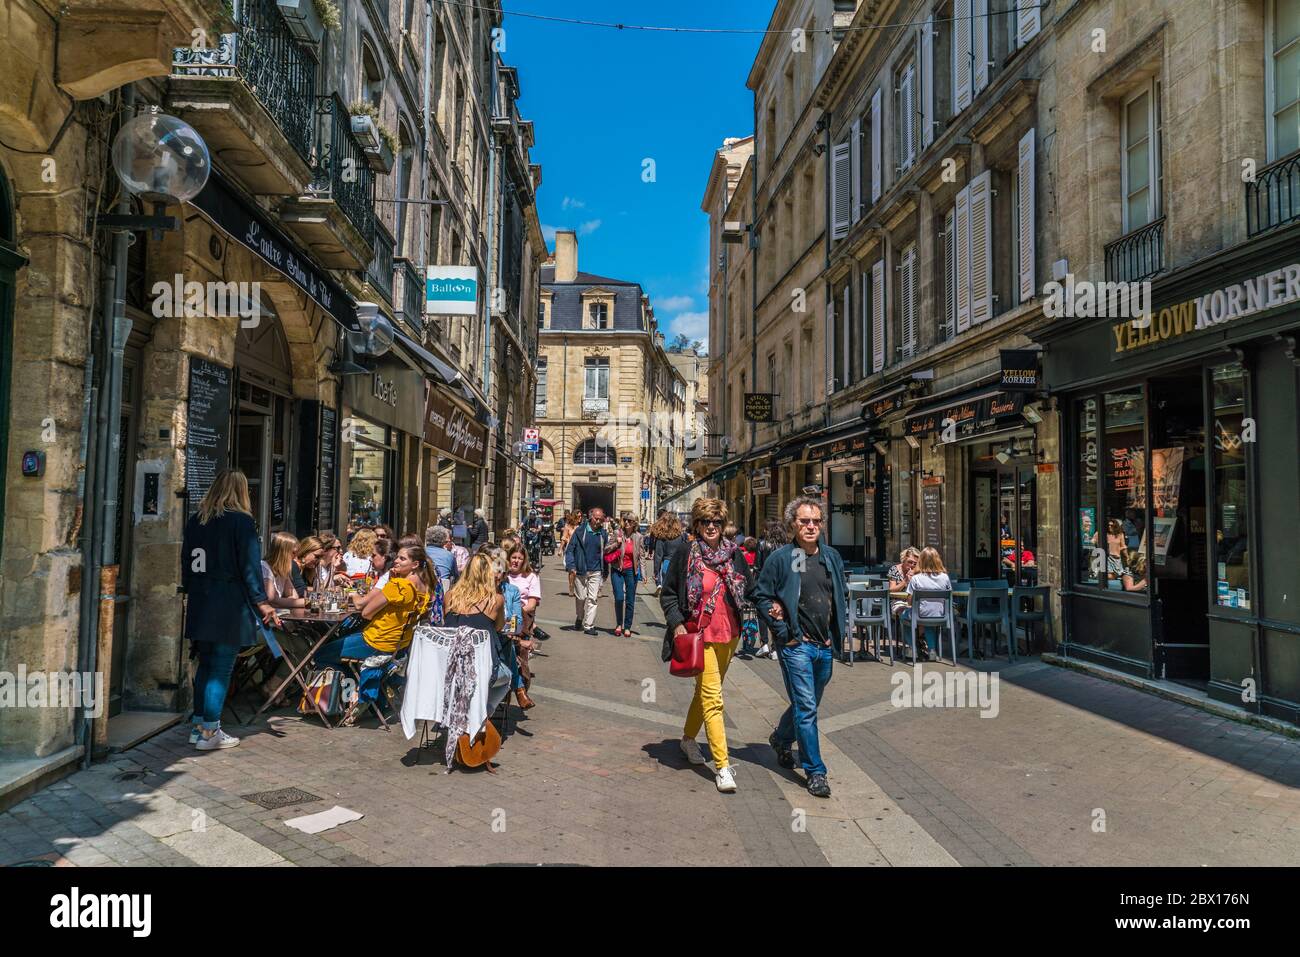 Bordeaux, France, 9 may 2018 - tourists and locals strawling, eating and drinking on the 'Rue de la Porte Dijeaux' Stock Photo